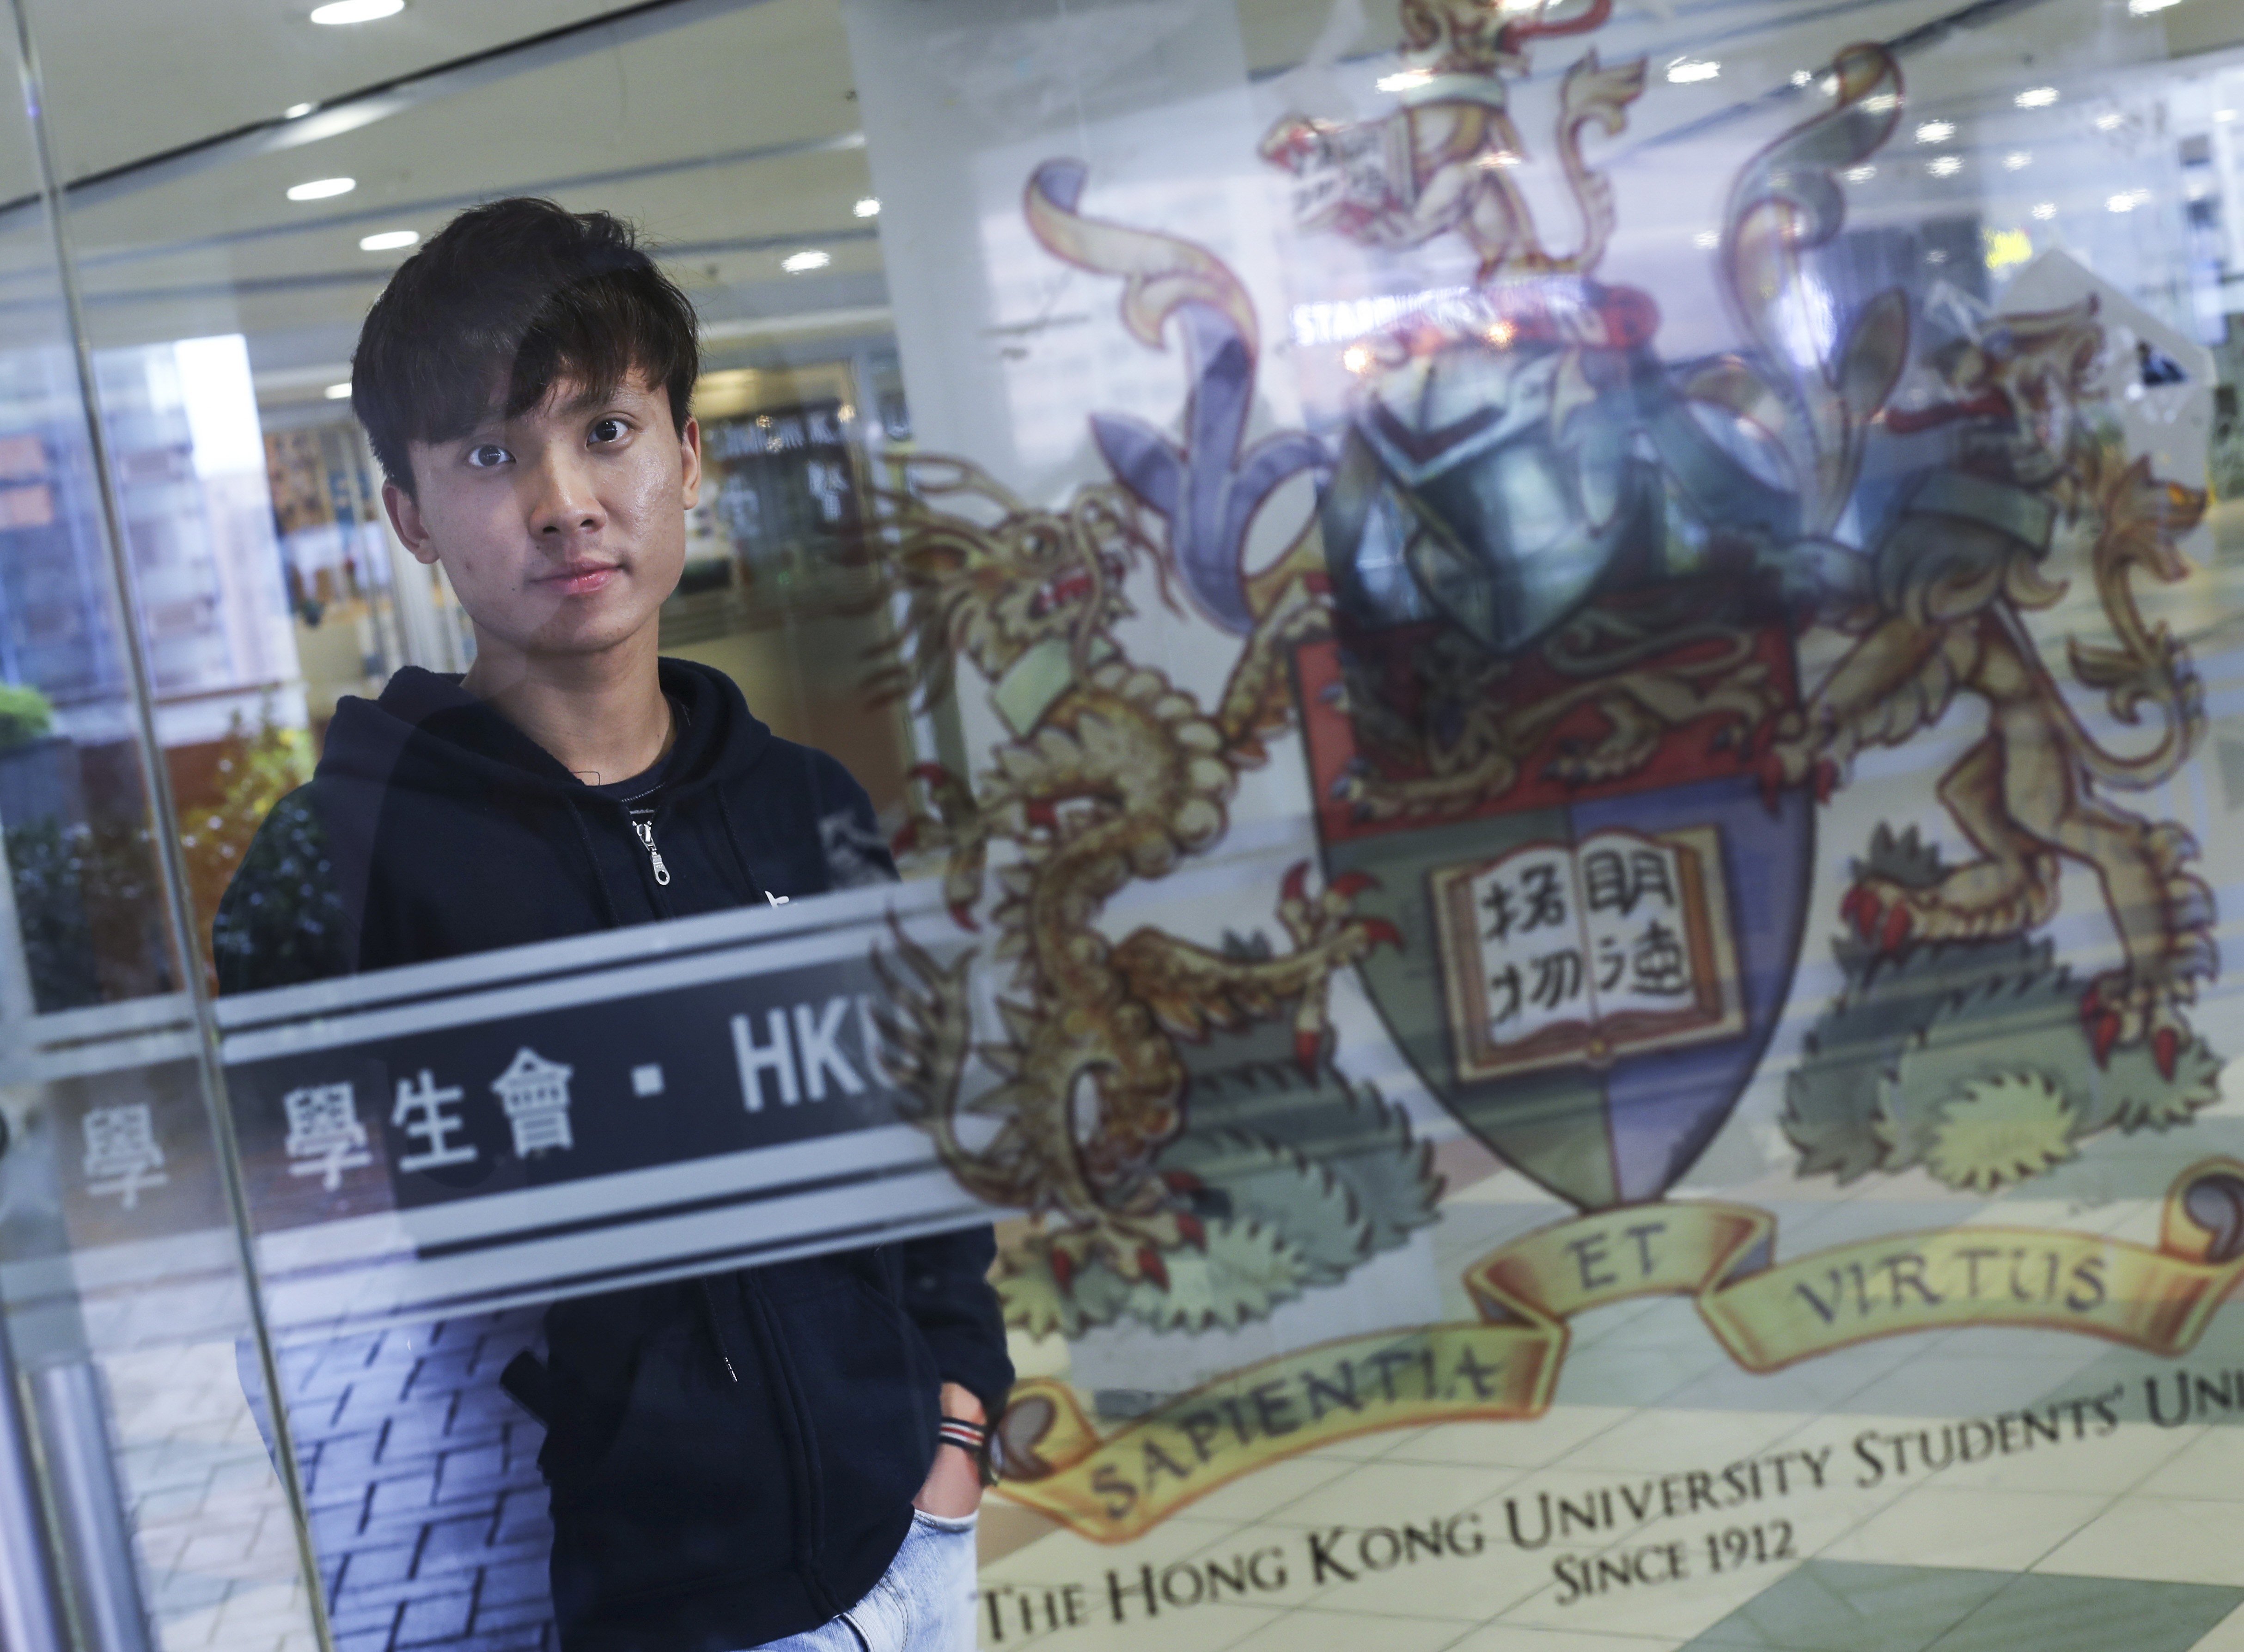 Wong has suspended his studies for a year to better fulfil his student union president duties. Photo: Nora Tam